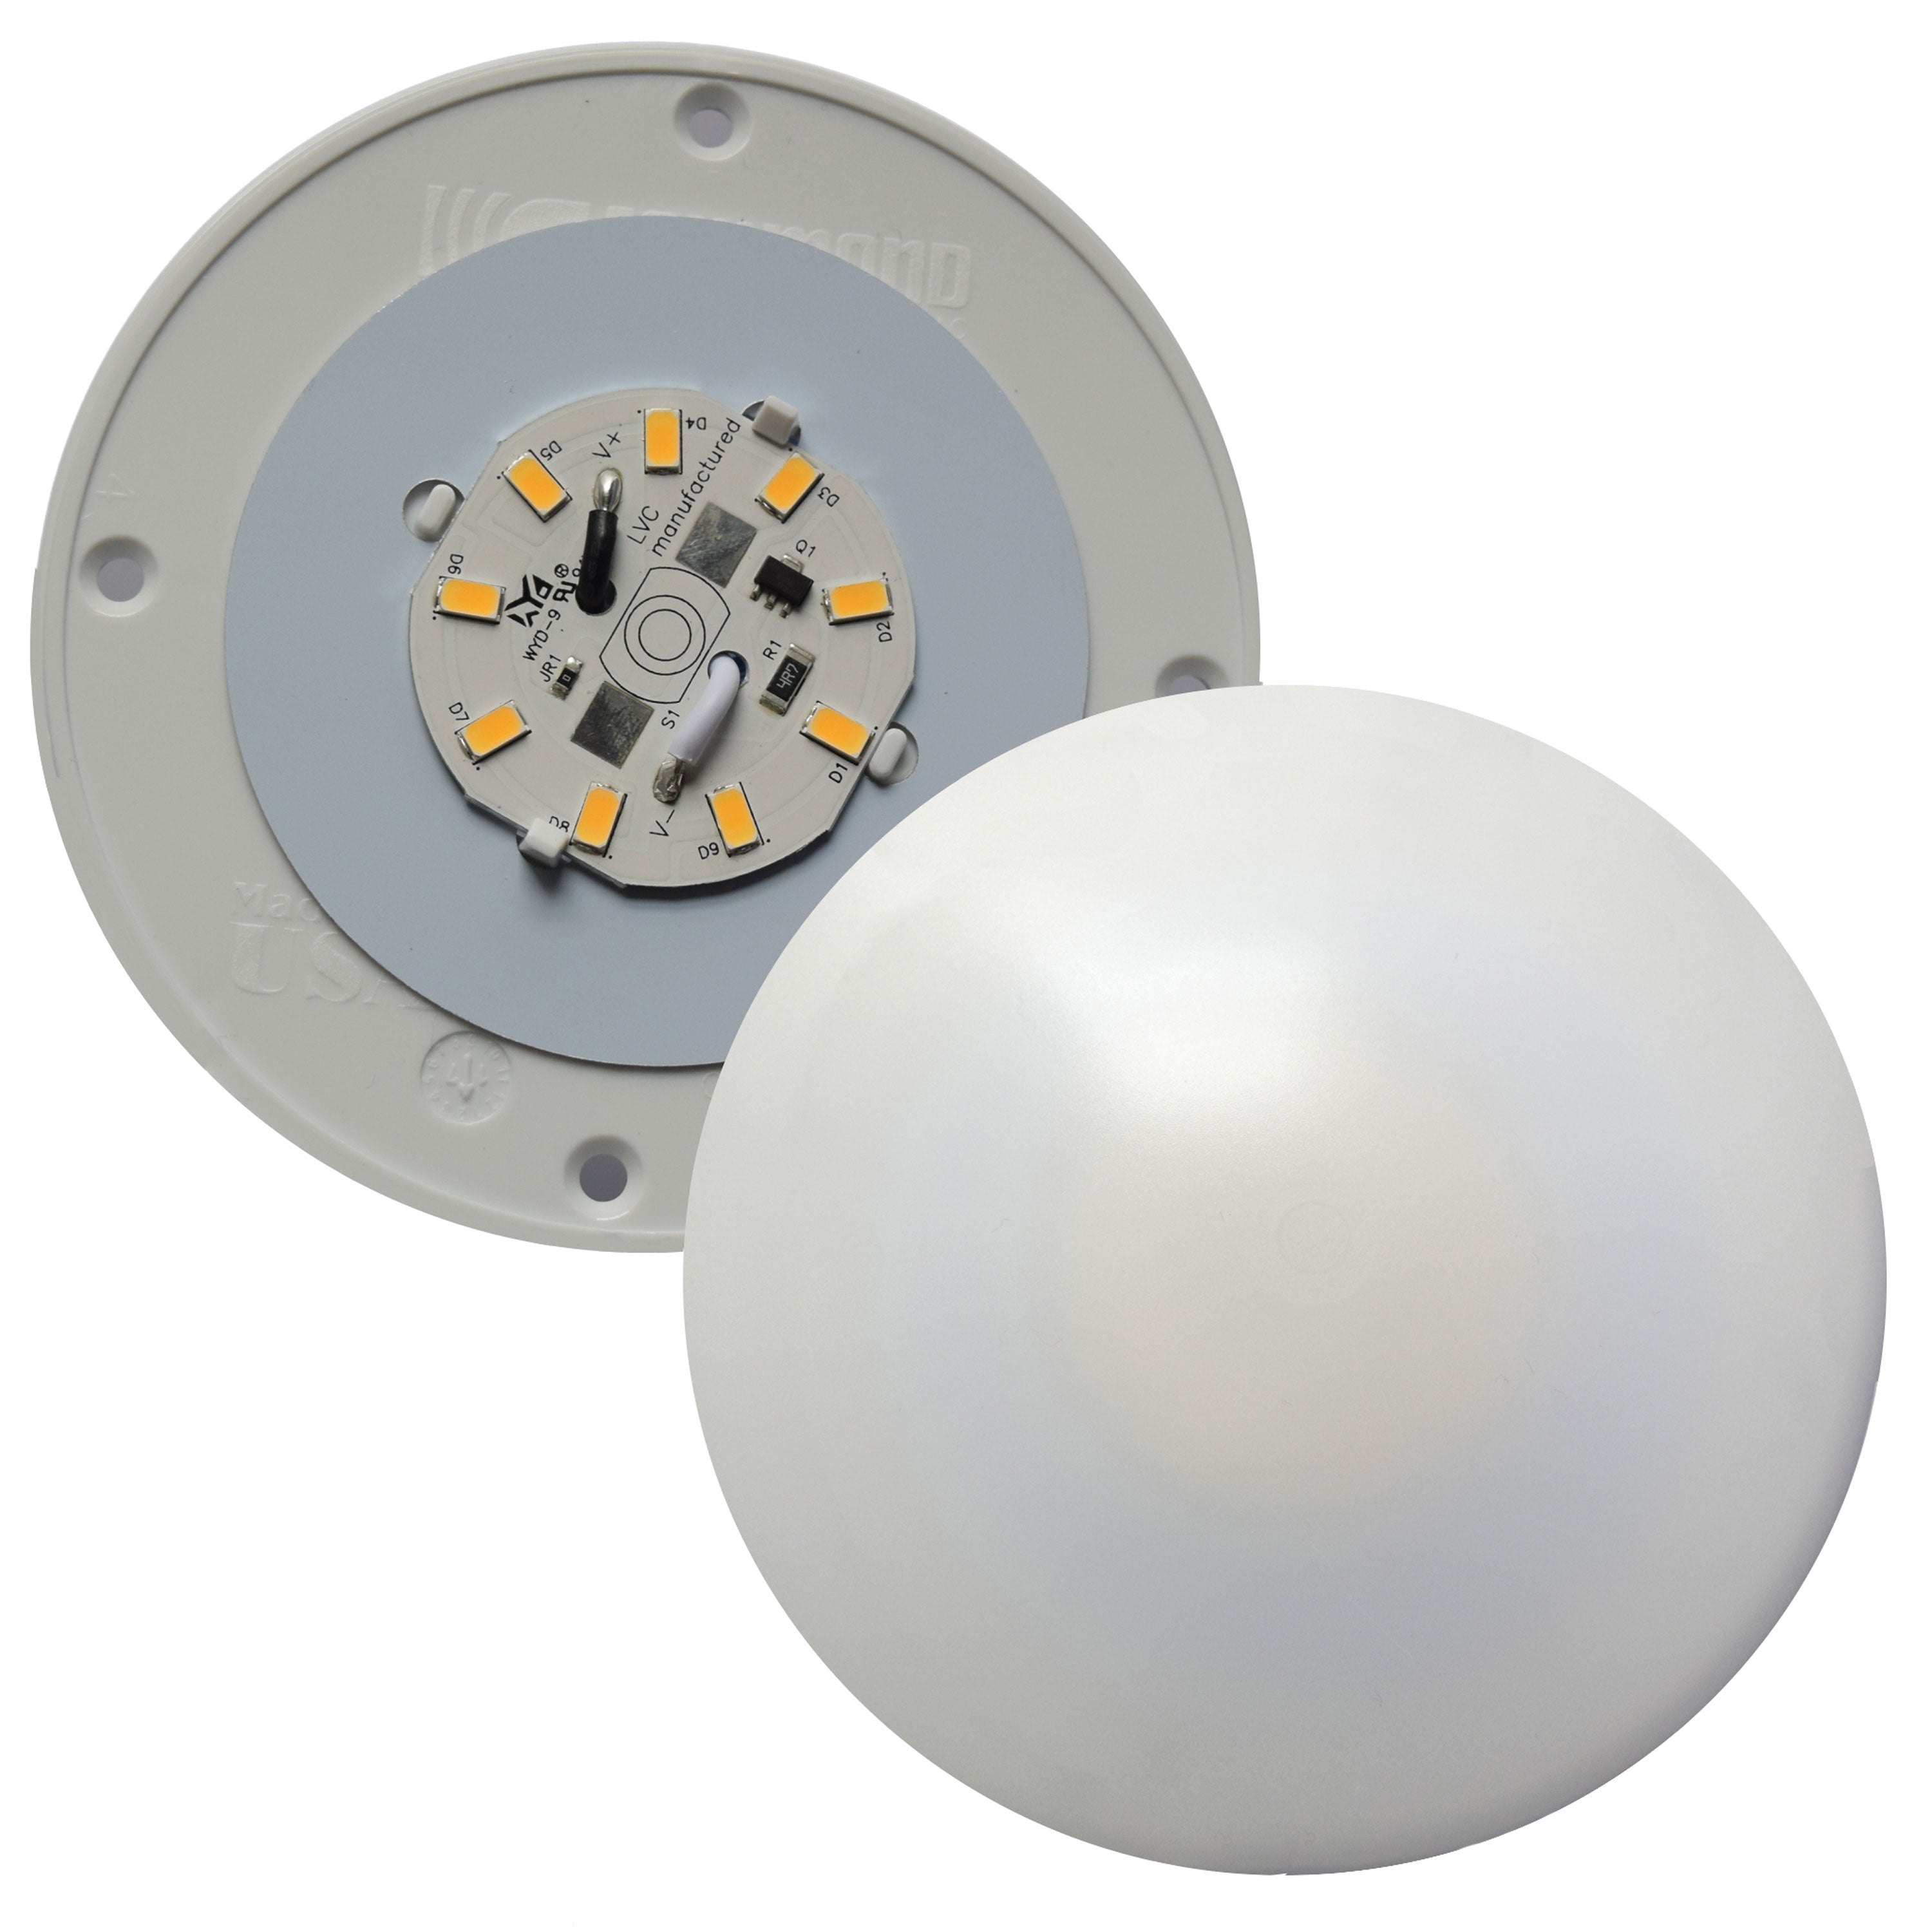 Fasteners Unlimited 001-1050 Surface Mount Round LED Ceiling Light - No Switch, 4 in. D CMD-001-1050